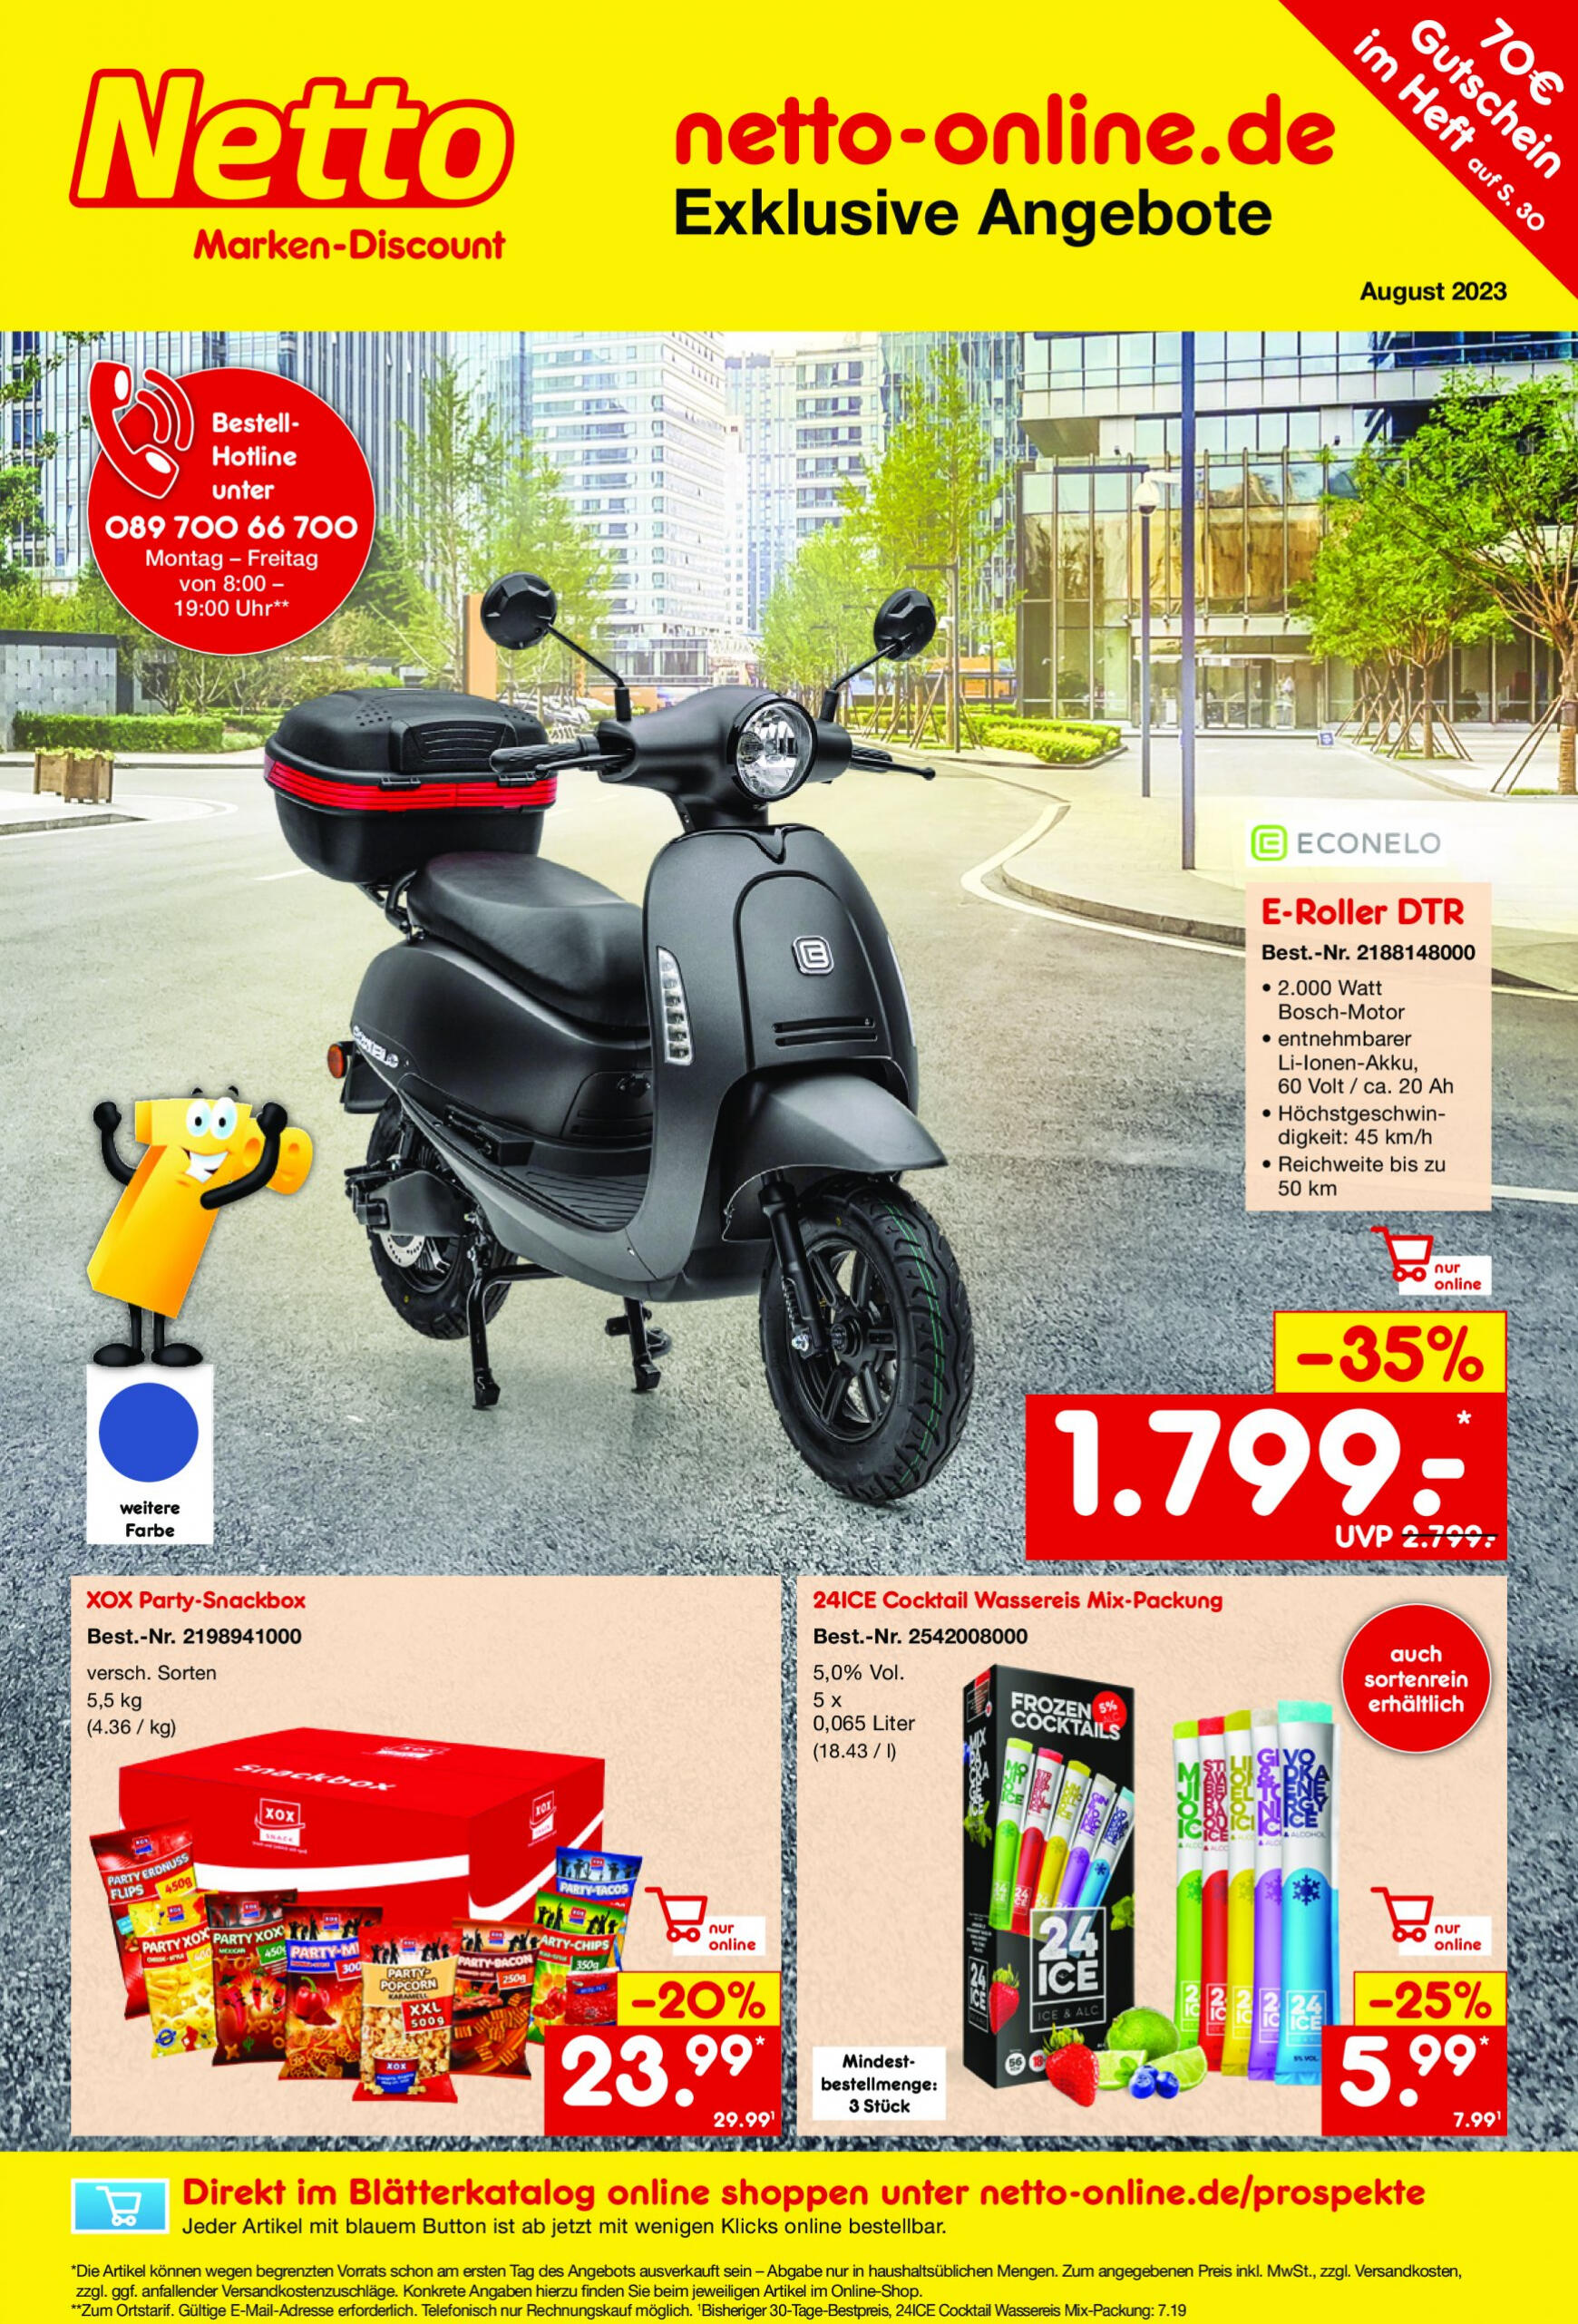 netto - Netto Online-Angebote August